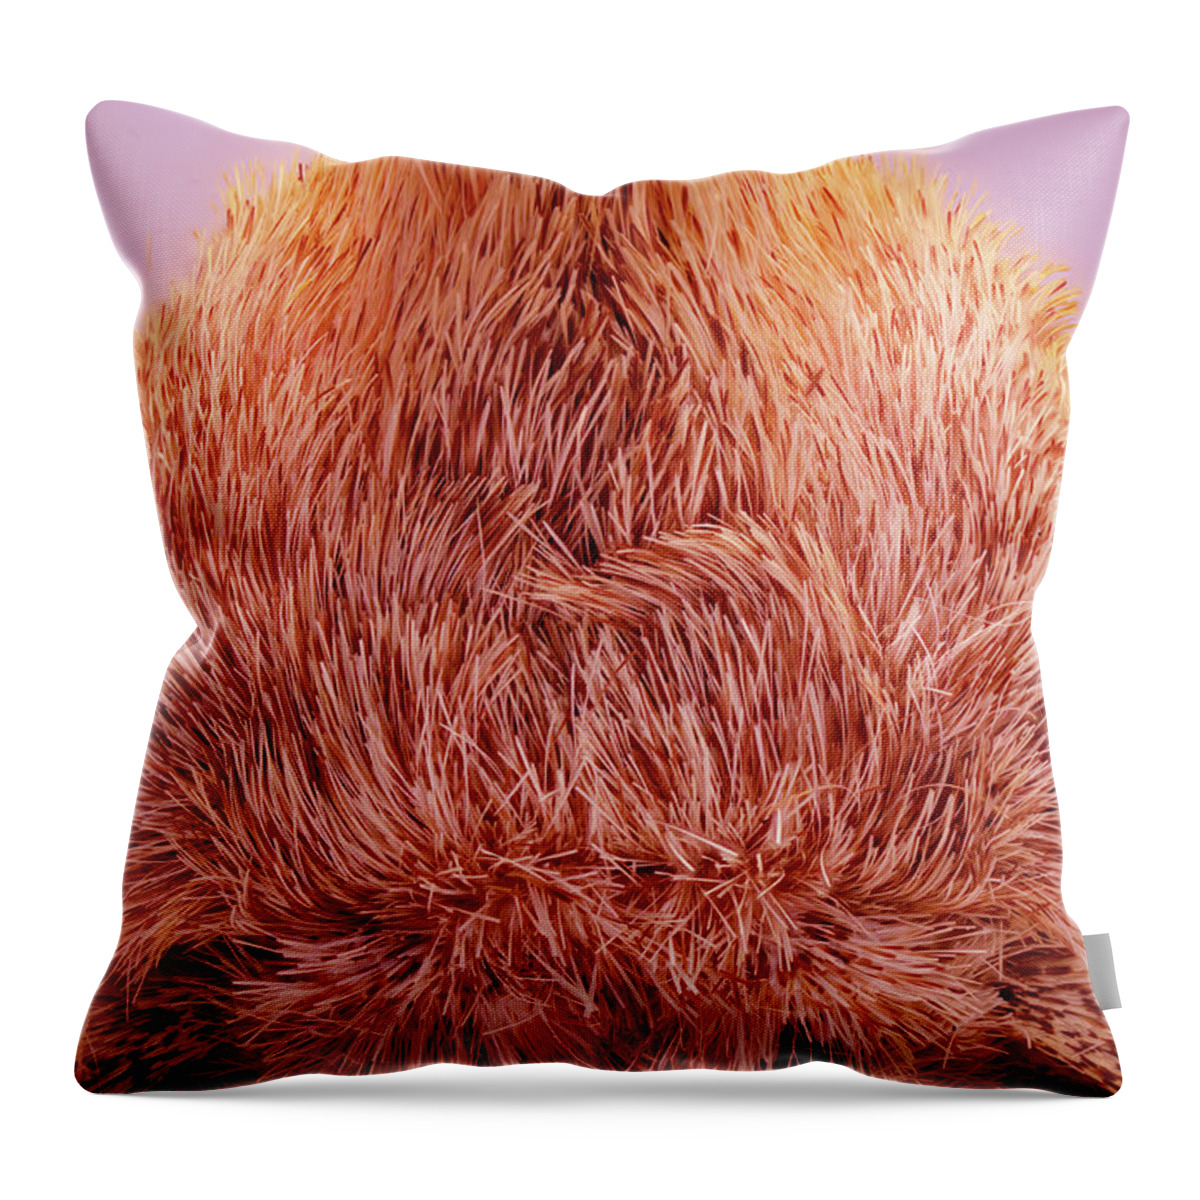 Moth Throw Pillow featuring the photograph Live Moth Head On by Daniel Reed